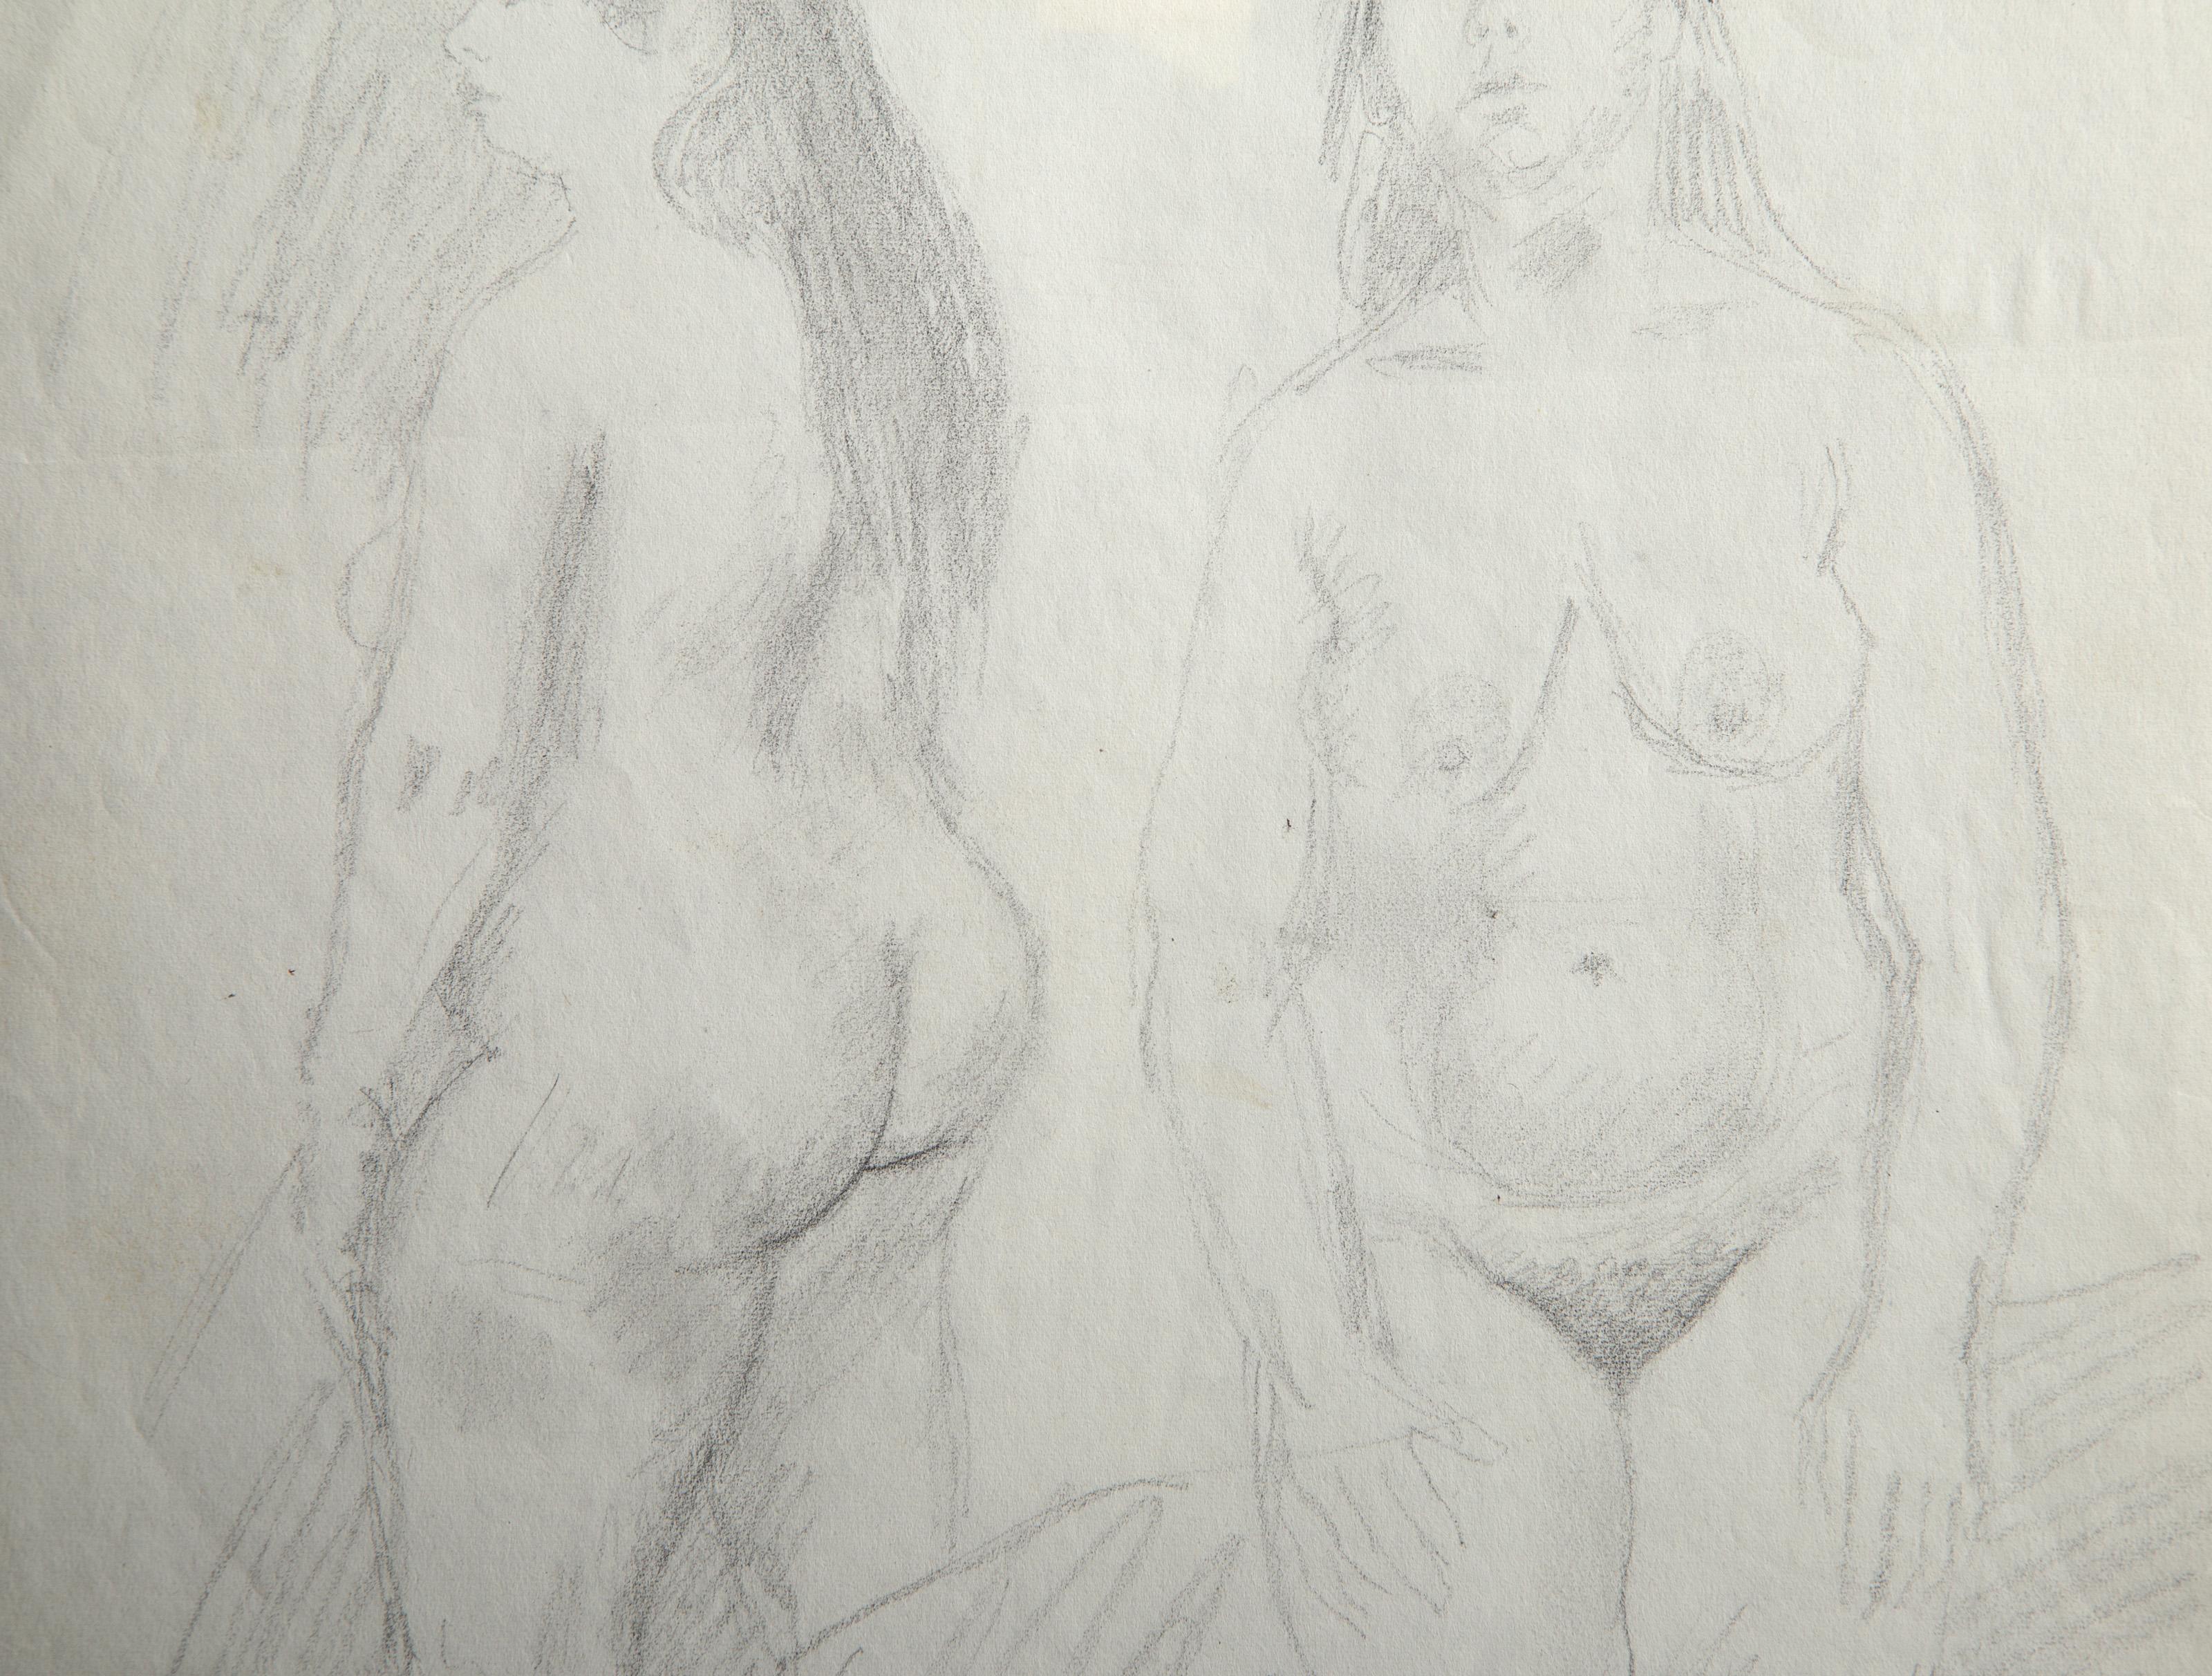 Nude Study, Graphite on Paper by Raphael Soyer For Sale 1